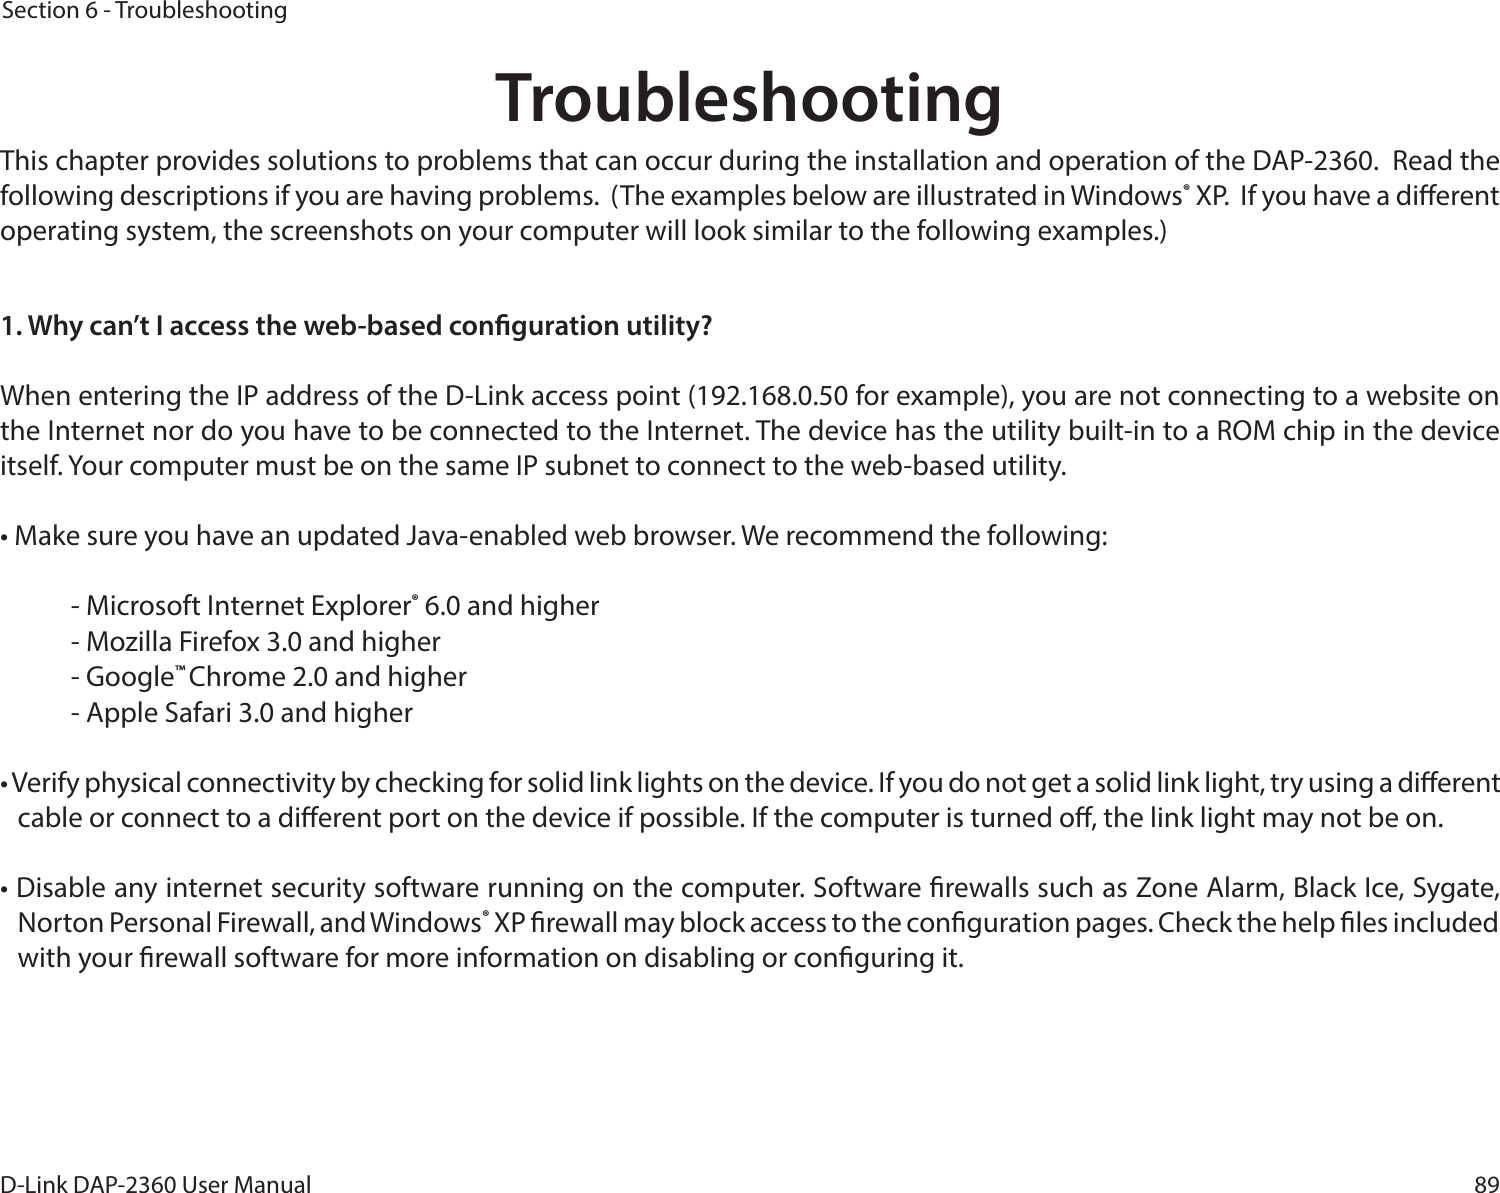 89D-Link DAP-2360 User ManualSection 6 - TroubleshootingTroubleshootingThis chapter provides solutions to problems that can occur during the installation and operation of the DAP-2360.  Read the following descriptions if you are having problems.  (The examples below are illustrated in Windows® XP.  If you have a dierent operating system, the screenshots on your computer will look similar to the following examples.)1. Why can’t I access the web-based conguration utility?When entering the IP address of the D-Link access point (192.168.0.50 for example), you are not connecting to a website on the Internet nor do you have to be connected to the Internet. The device has the utility built-in to a ROM chip in the device itself. Your computer must be on the same IP subnet to connect to the web-based utility. • Make sure you have an updated Java-enabled web browser. We recommend the following: - Microsoft Internet Explorer® 6.0 and higher- Mozilla Firefox 3.0 and higher- Google™ Chrome 2.0 and higher- Apple Safari 3.0 and higher• Verify physical connectivity by checking for solid link lights on the device. If you do not get a solid link light, try using a dierent cable or connect to a dierent port on the device if possible. If the computer is turned o, the link light may not be on.• Disable any internet security software running on the computer. Software rewalls such as Zone Alarm, Black Ice, Sygate, Norton Personal Firewall, and Windows® XP rewall may block access to the conguration pages. Check the help les included with your rewall software for more information on disabling or conguring it.